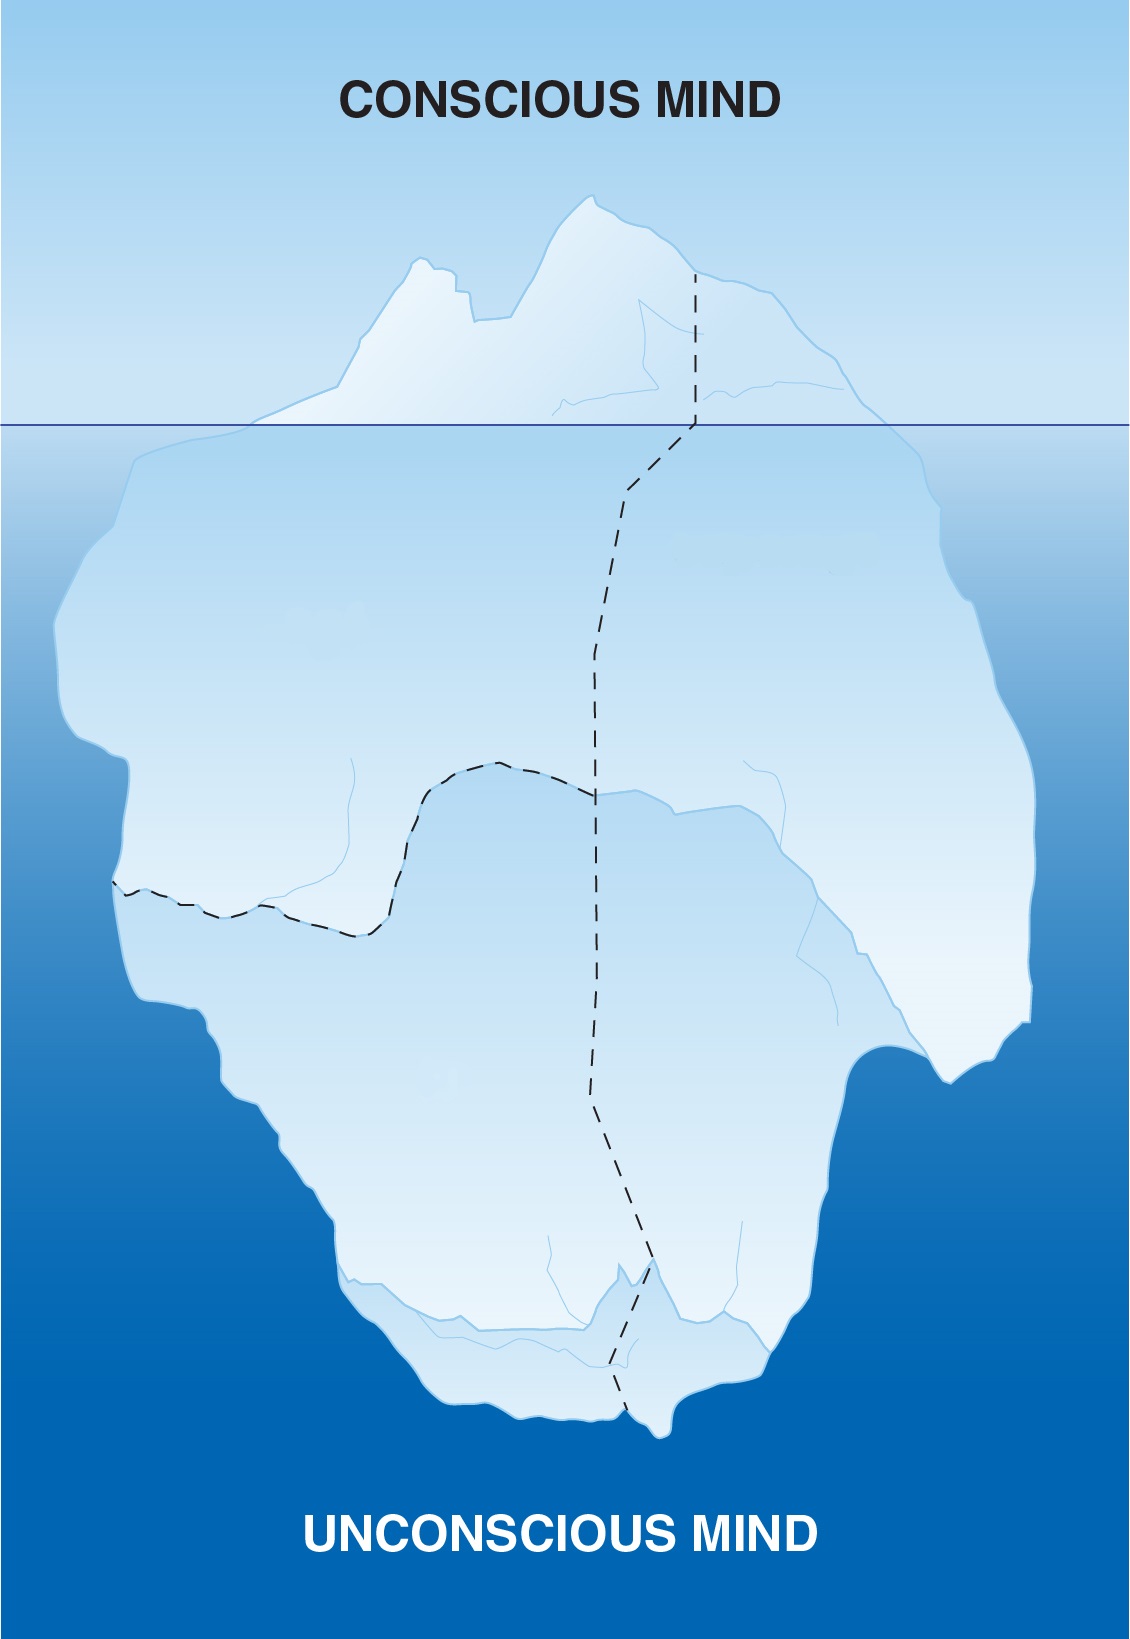 An iceberg floats in water. The small portion above the water is labeled the 'conscious mind', and the larger portion below the water is labeled the 'unconscious mind'